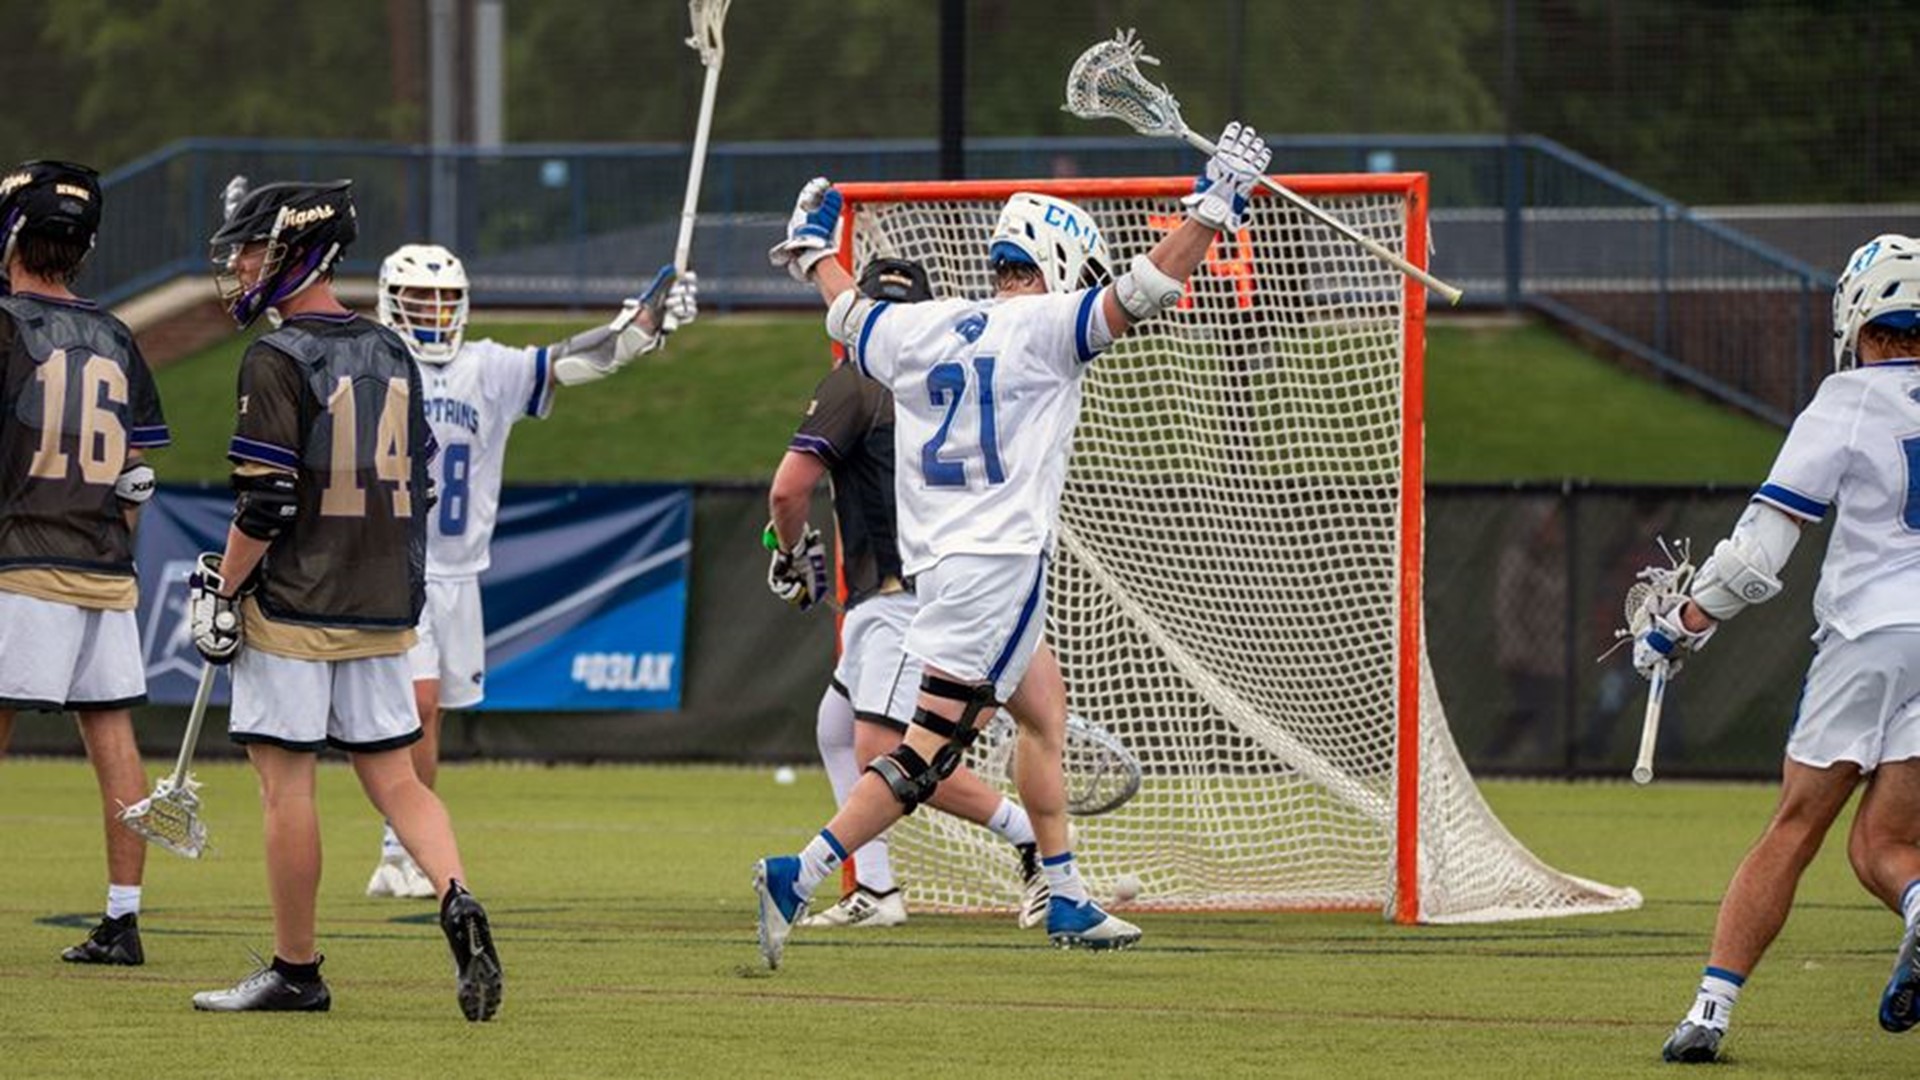 Overall, Christopher Newport held a 63-17 advantage in shots and a 56-16 edge in ground balls.